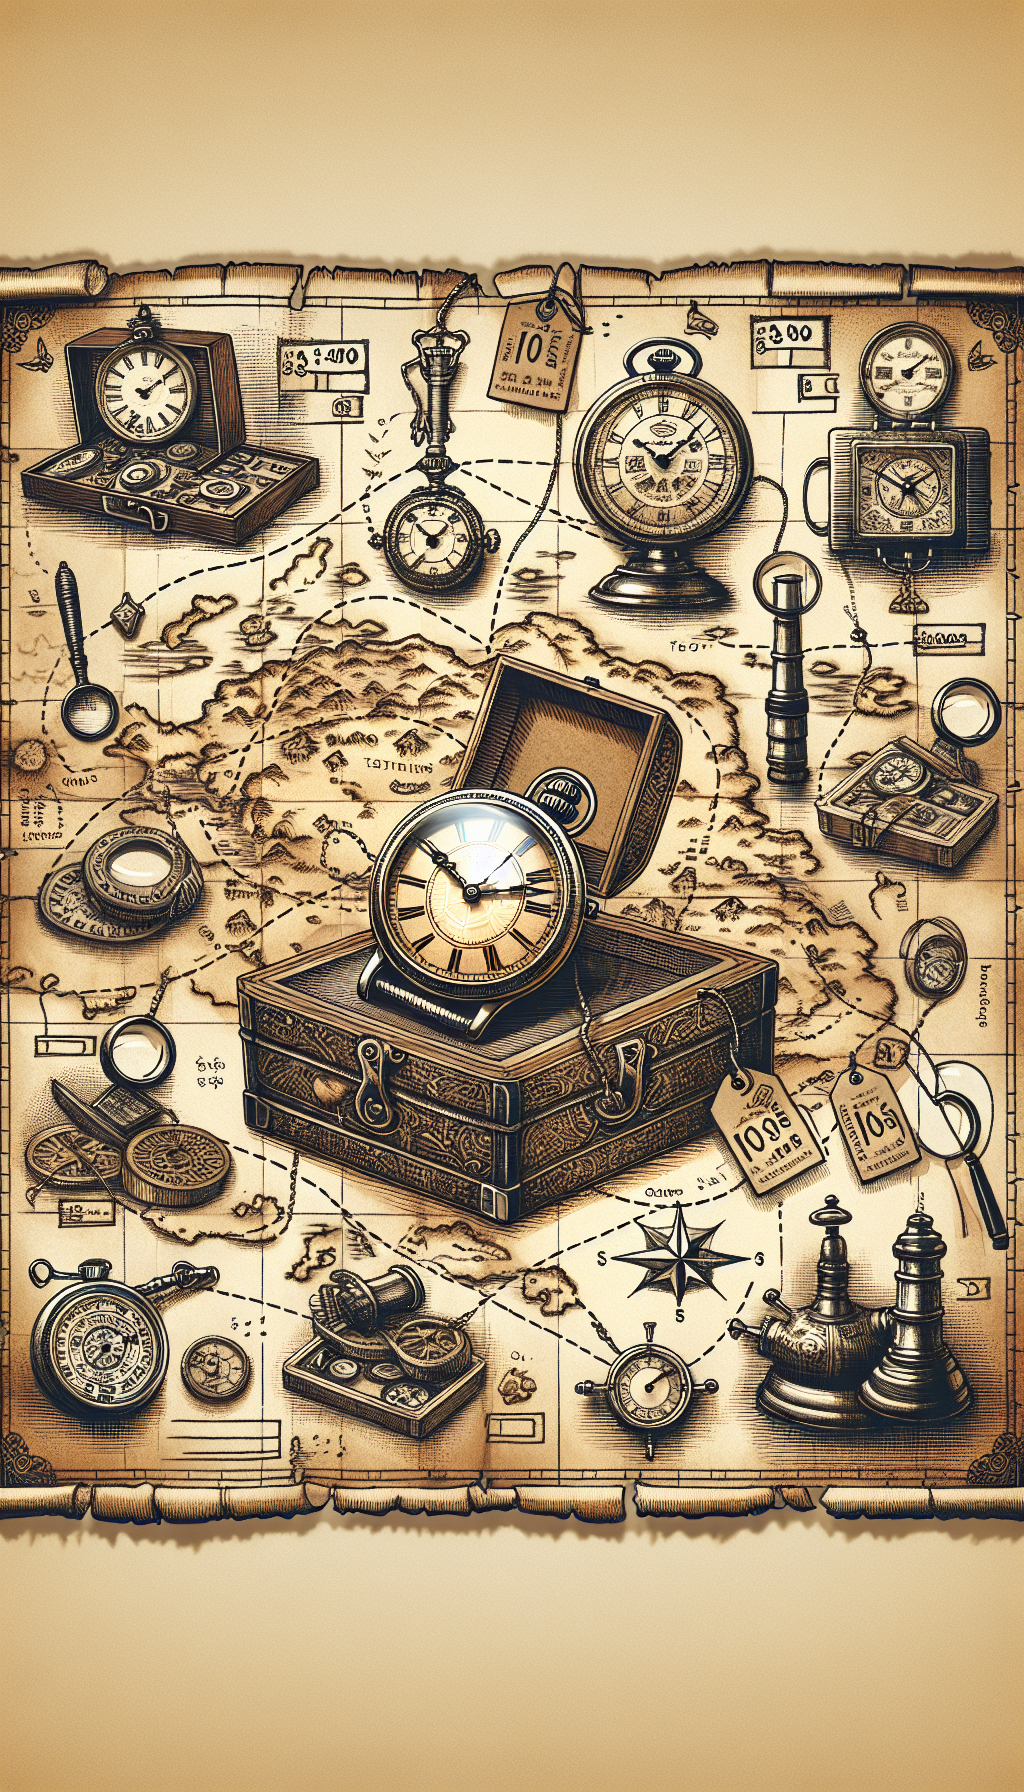 An illustrated treasure map unfurls across the frame, leading to a vintage Pulsar watch with a radiant glow, set as the prized jewel on a pedestal. The map is dotted with various watch icons, magnifying glasses, and auction gavels, symbolizing the search and acquisition, while price tags dangle from the watch, emphasizing its value. Different sections of the map are in sepia tones, watercolors, and line art to represent diversity in style.